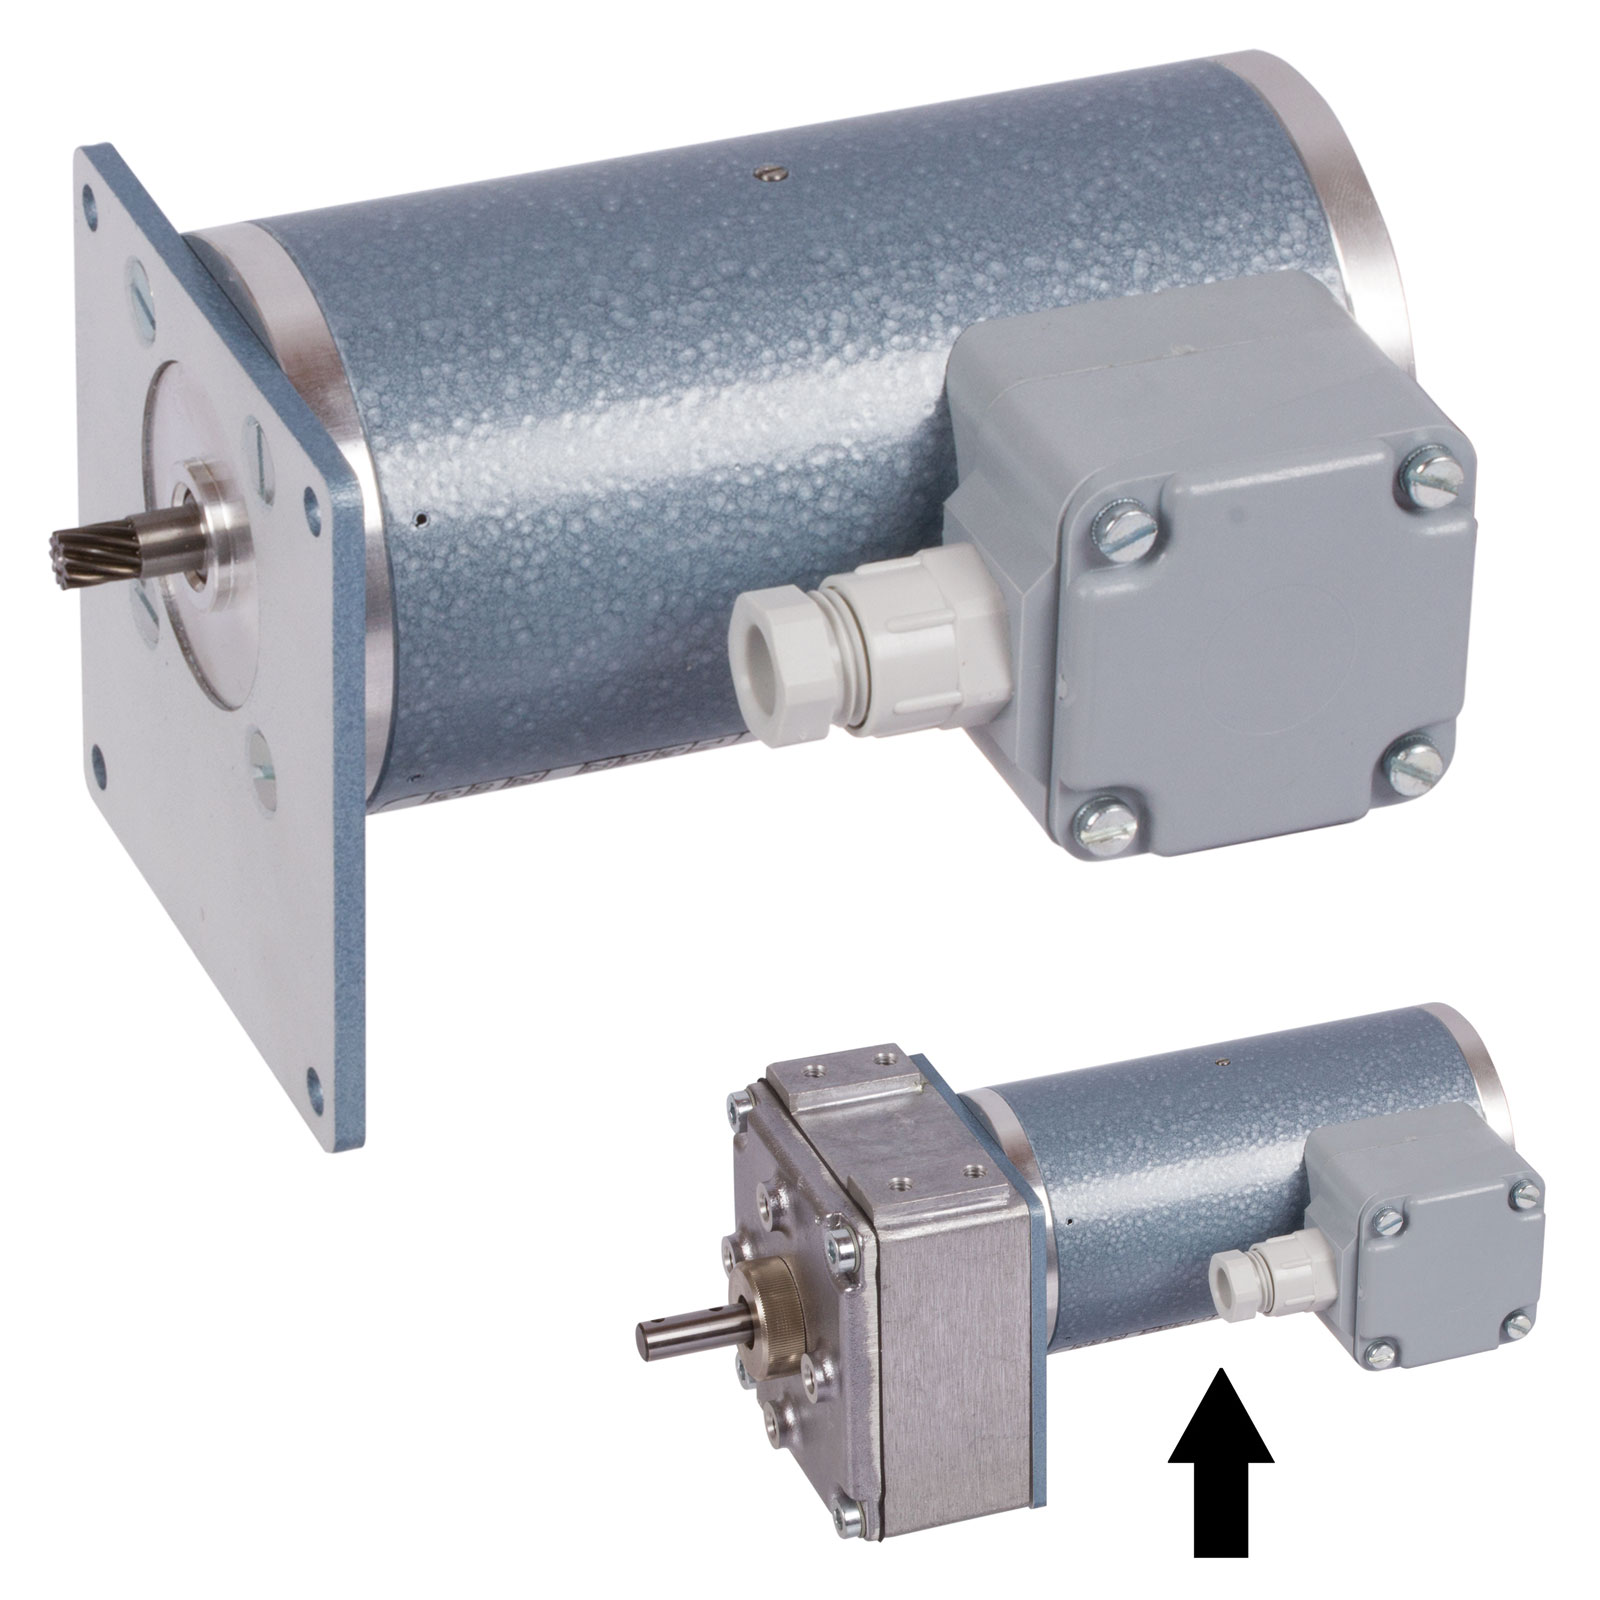 Capacitor motor 230V 50Hz matching with gearbox GE/I without capacitor SKU:  43040100 - Maedler North America